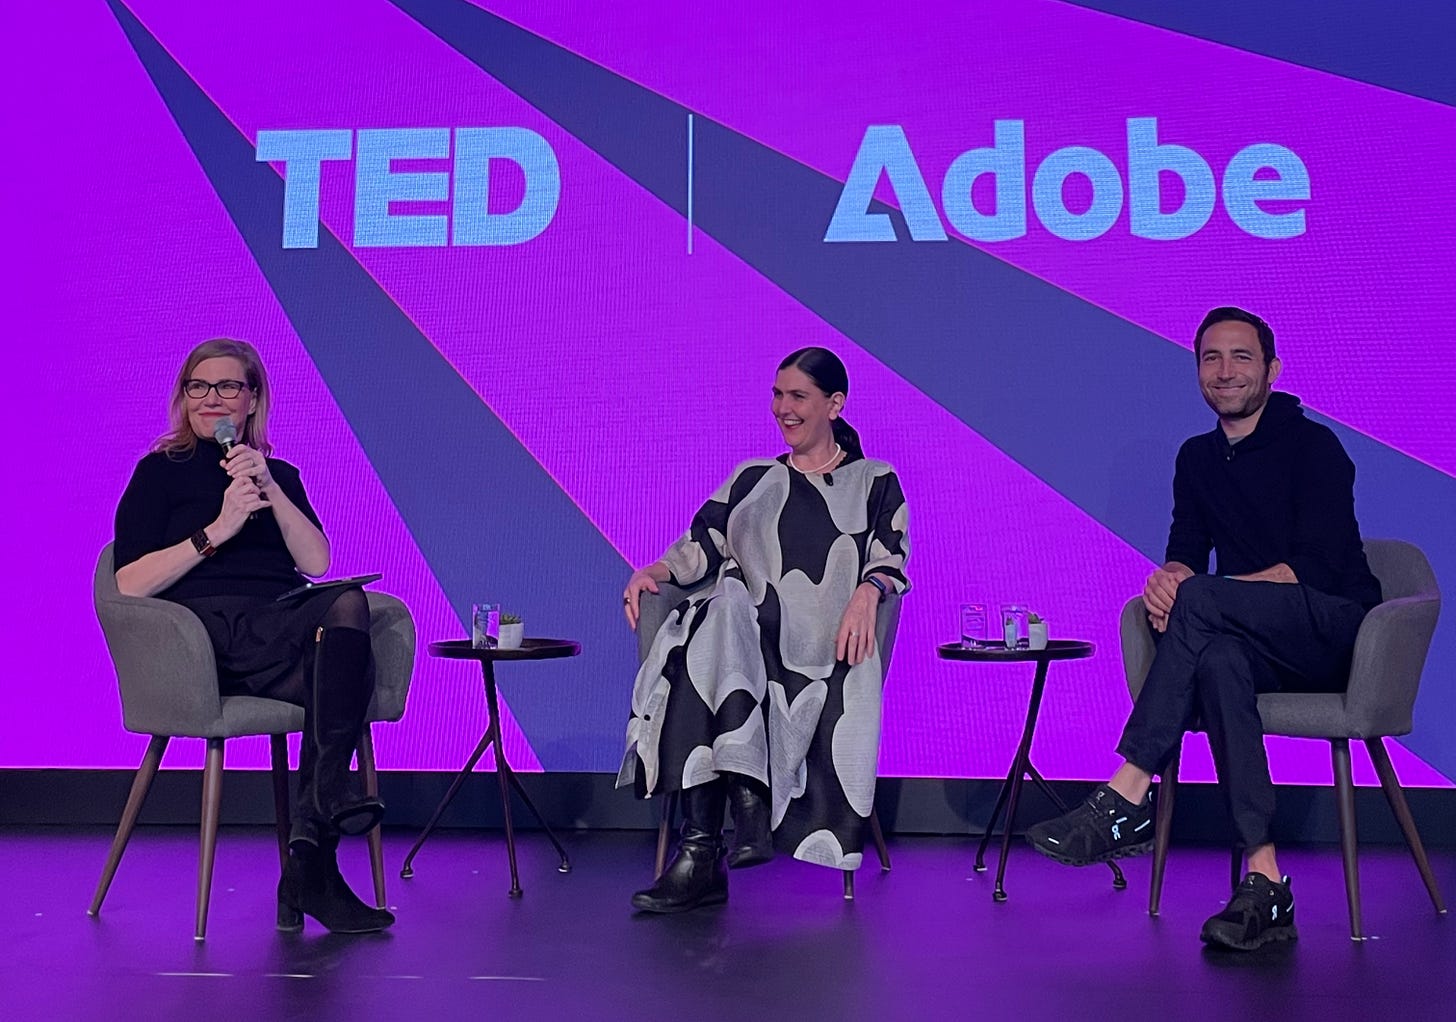 A photograph of three panelists seated on stage, from left to right: Debbie Millman, Honor Harger, and Scott Belsky, who smiles at the camera. The screen behind the speakers is a bold pattern of pink and navy with the text 'TED | Adobe'.